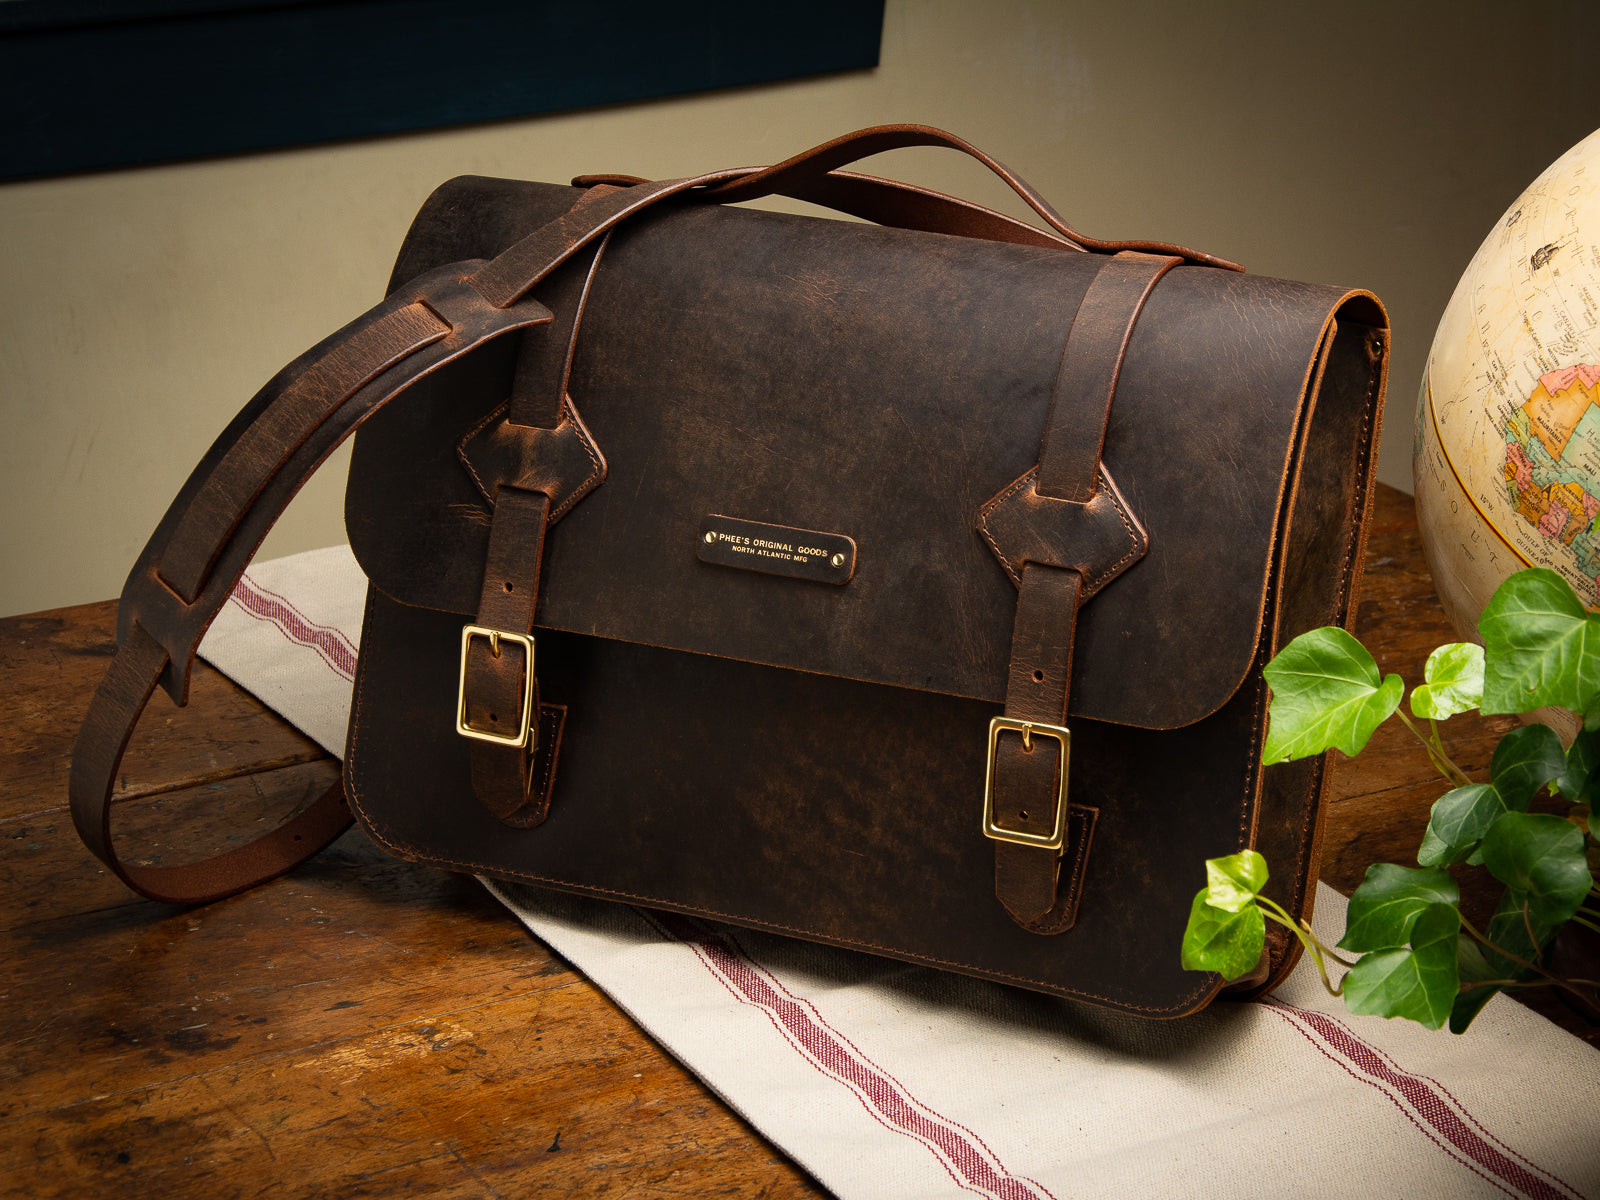 Glengarry messenger bag in crazy horse brown leather with brass hardware